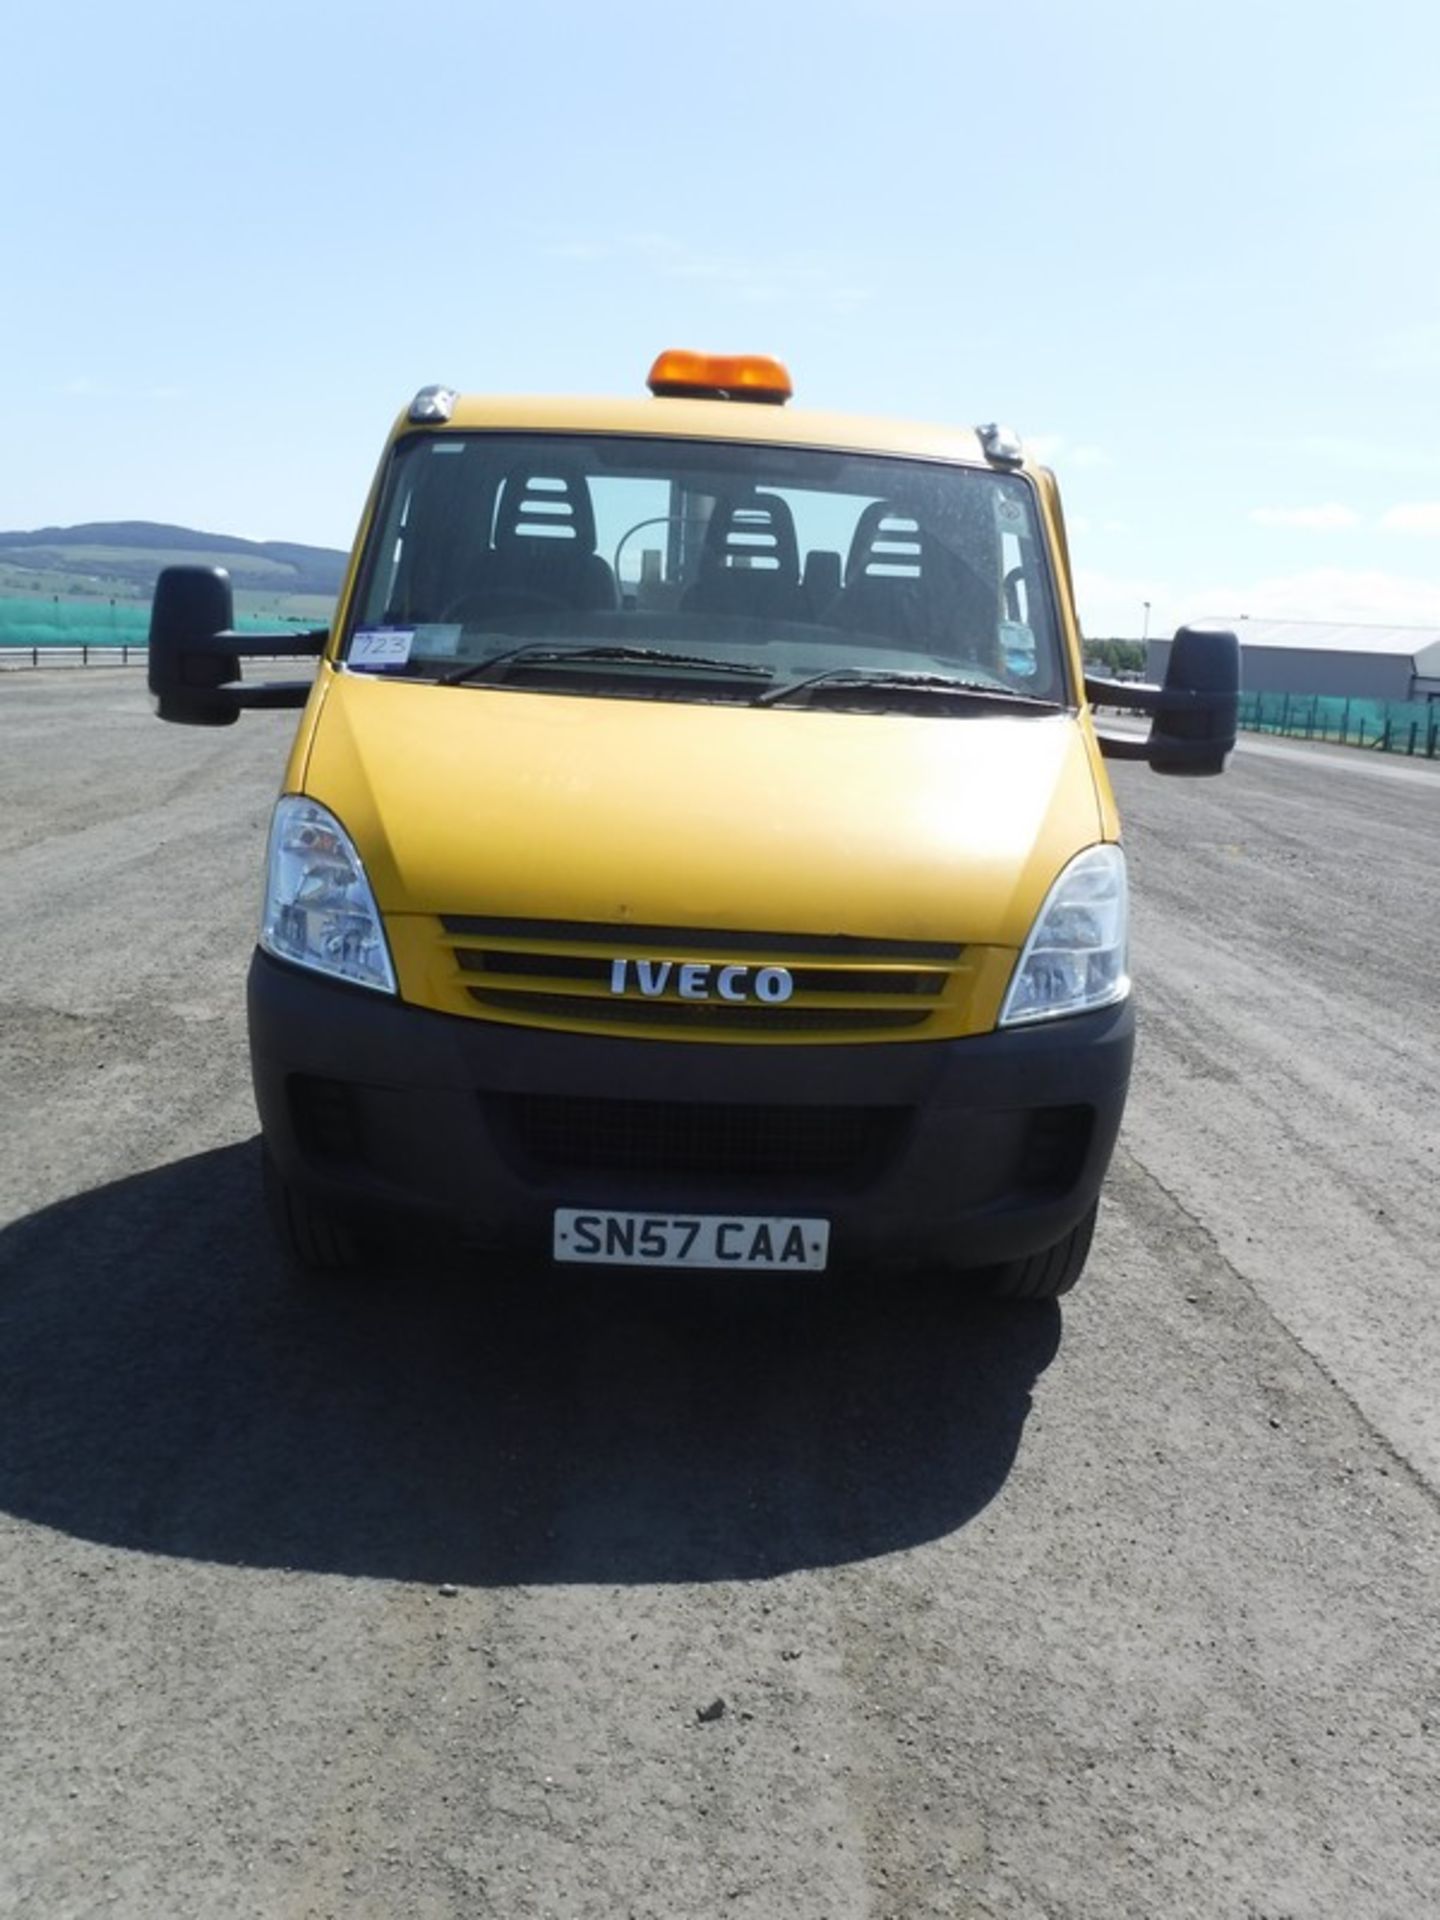 IVECO DAILY 65C18 - 2998cc - Image 16 of 30